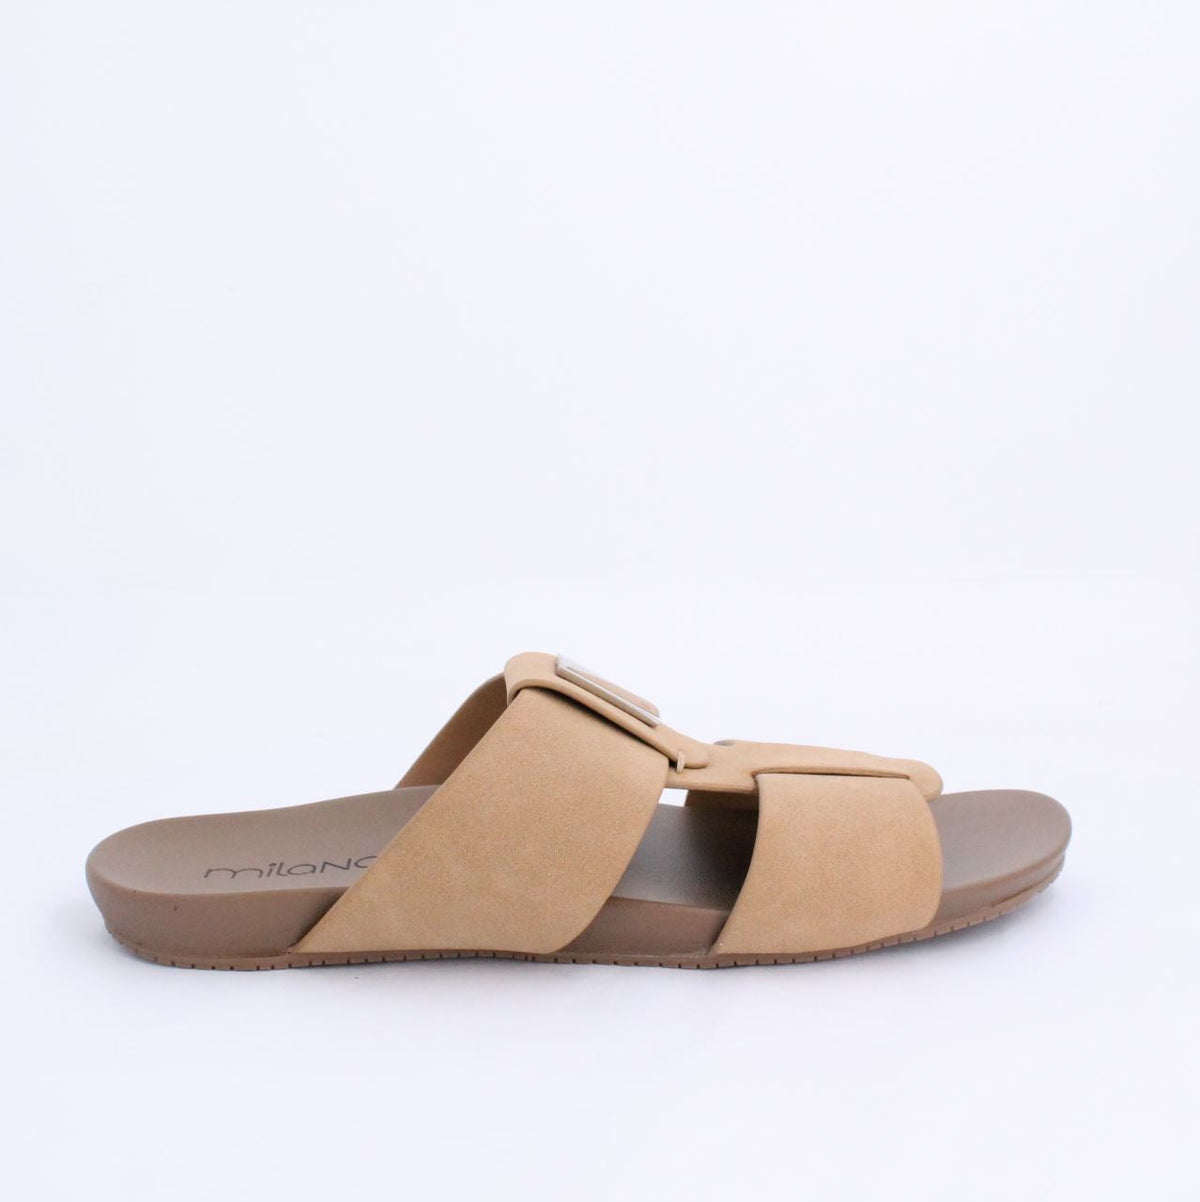 GRIFF MENS SANDALS-TAUPE